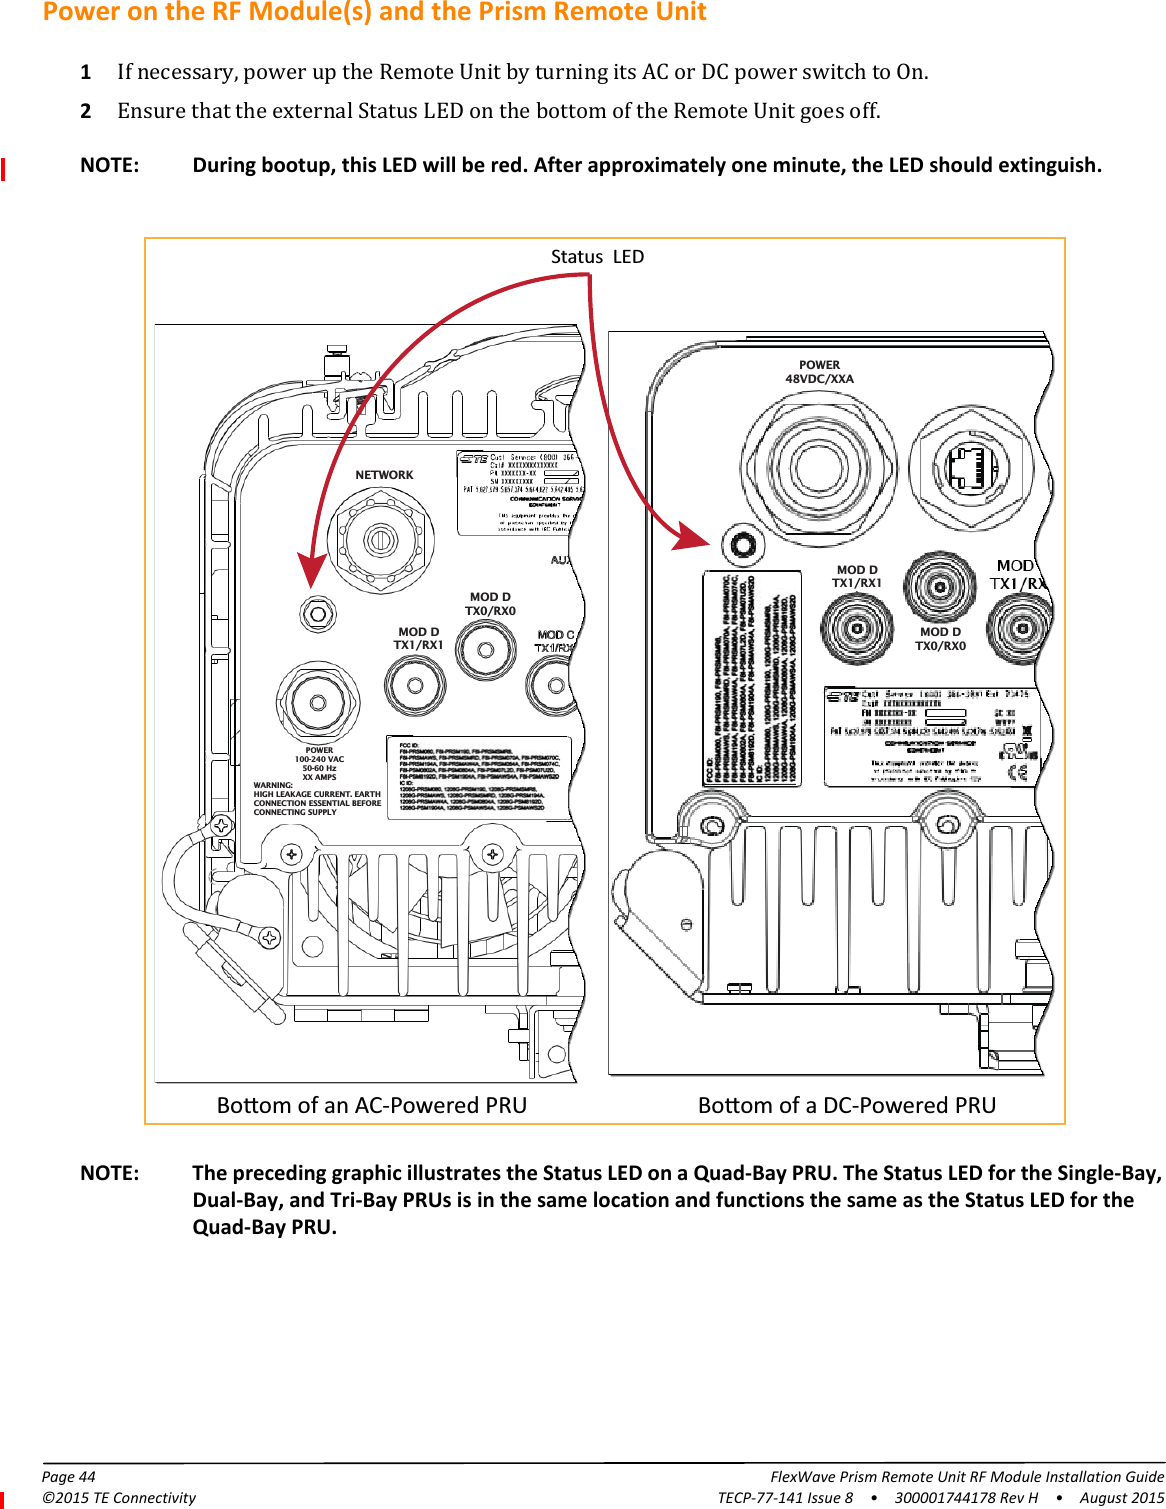 Page 44 FlexWave Prism Remote Unit RF Module Installation Guide©2015 TE Connectivity TECP-77-141 Issue 8  •  300001744178 Rev H  •  August 2015Power on the RF Module(s) and the Prism Remote Unit1If necessary, power up the Remote Unit by turning its AC or DC power switch to On.2Ensure that the external Status LED on the bottom of the Remote Unit goes off. Boom of an AC-Powered PRU Boom of a DC-Powered PRUStatus  LEDNETWORKPOWER48VDC/XXAMOD DTX1/RX1NETWORKMOD DTX1/RX1POWER100-240 VAC50-60 HzXX AMPSWARNING:HIGH LEAKAGE CURRENT. EARTHCONNECTION ESSENTIAL BEFORECONNECTING SUPPLYMOD DTX0/RX0MOD DTX0/RX0NOTE: During bootup, this LED will be red. After approximately one minute, the LED should extinguish.NOTE: The preceding graphic illustrates the Status LED on a Quad-Bay PRU. The Status LED for the Single-Bay, Dual-Bay, and Tri-Bay PRUs is in the same location and functions the same as the Status LED for the Quad-Bay PRU.